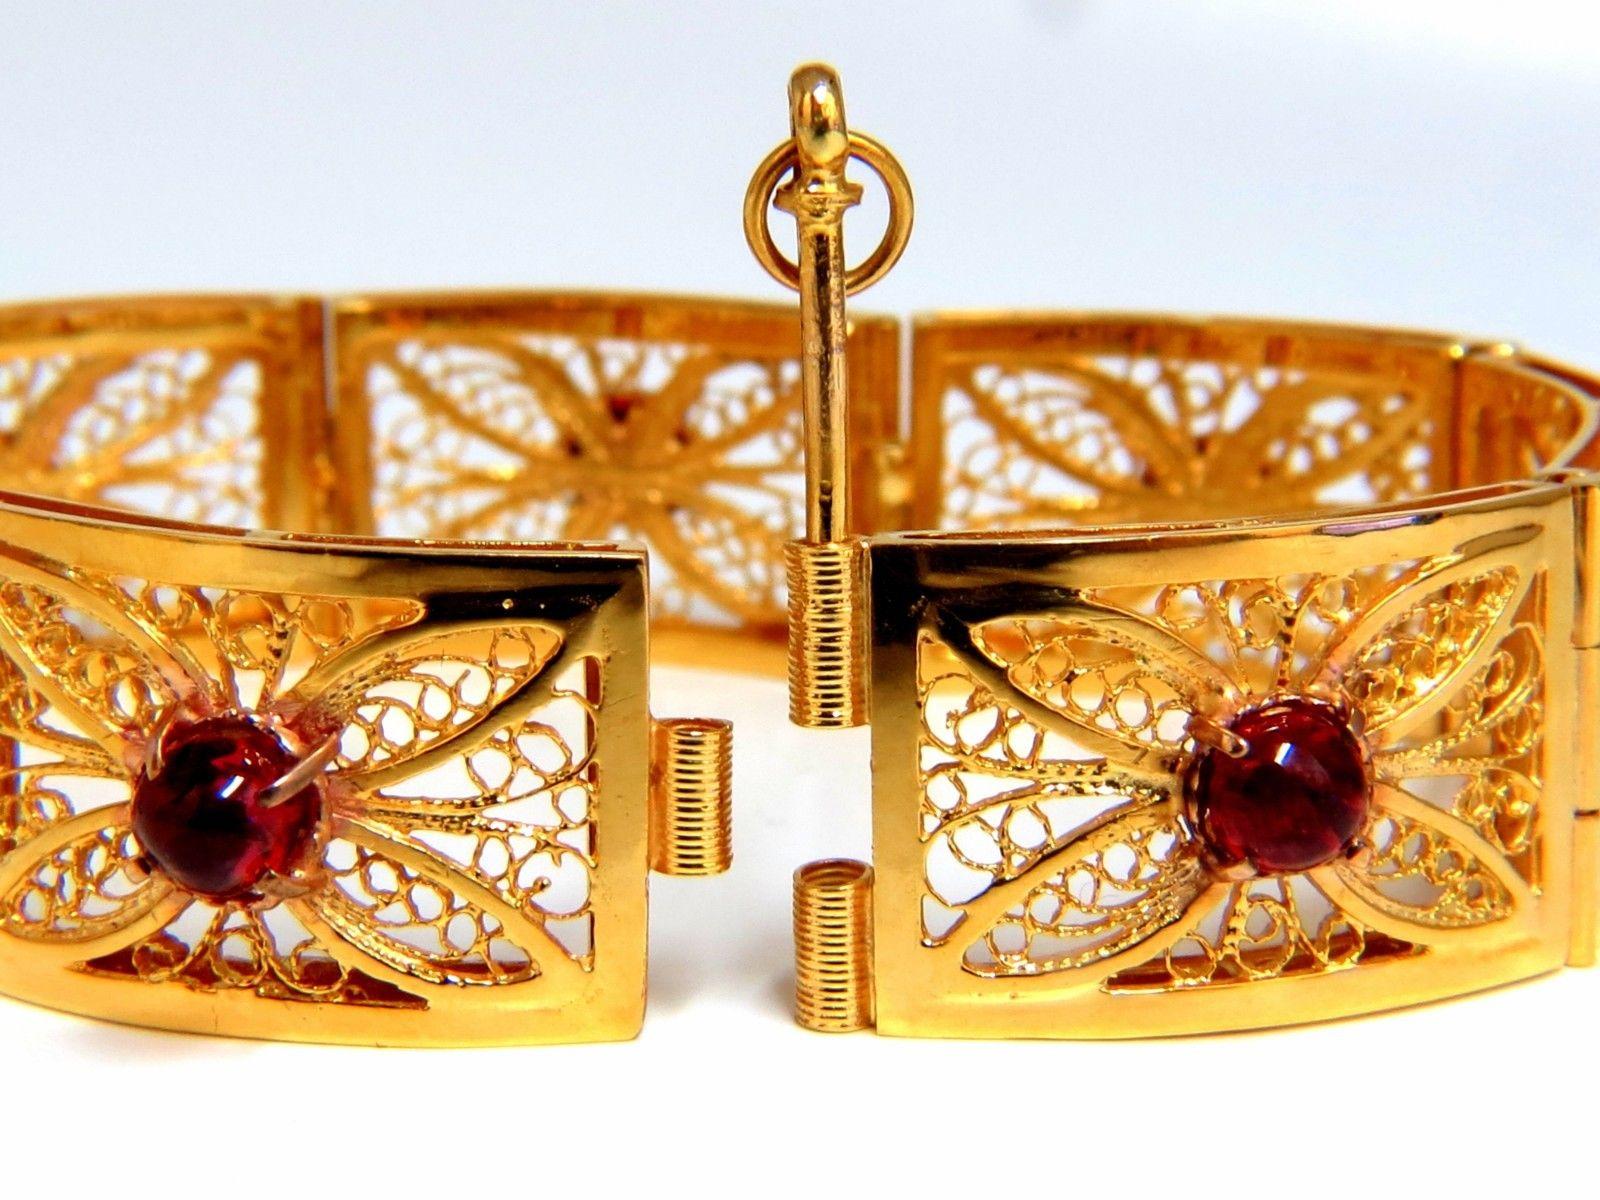 7.40ct. Natural Cabochon Spinels bracelet.

Vintage Open Gilt Design

Vivid Red colors.

Transparent & Clean Clarity.

 Average 5.7mm

No Enhancements & Fully Natural.

14kt. Yellow gold 

37 Grams.

5.5mm wide bracelet

7.25 inches long (wearable